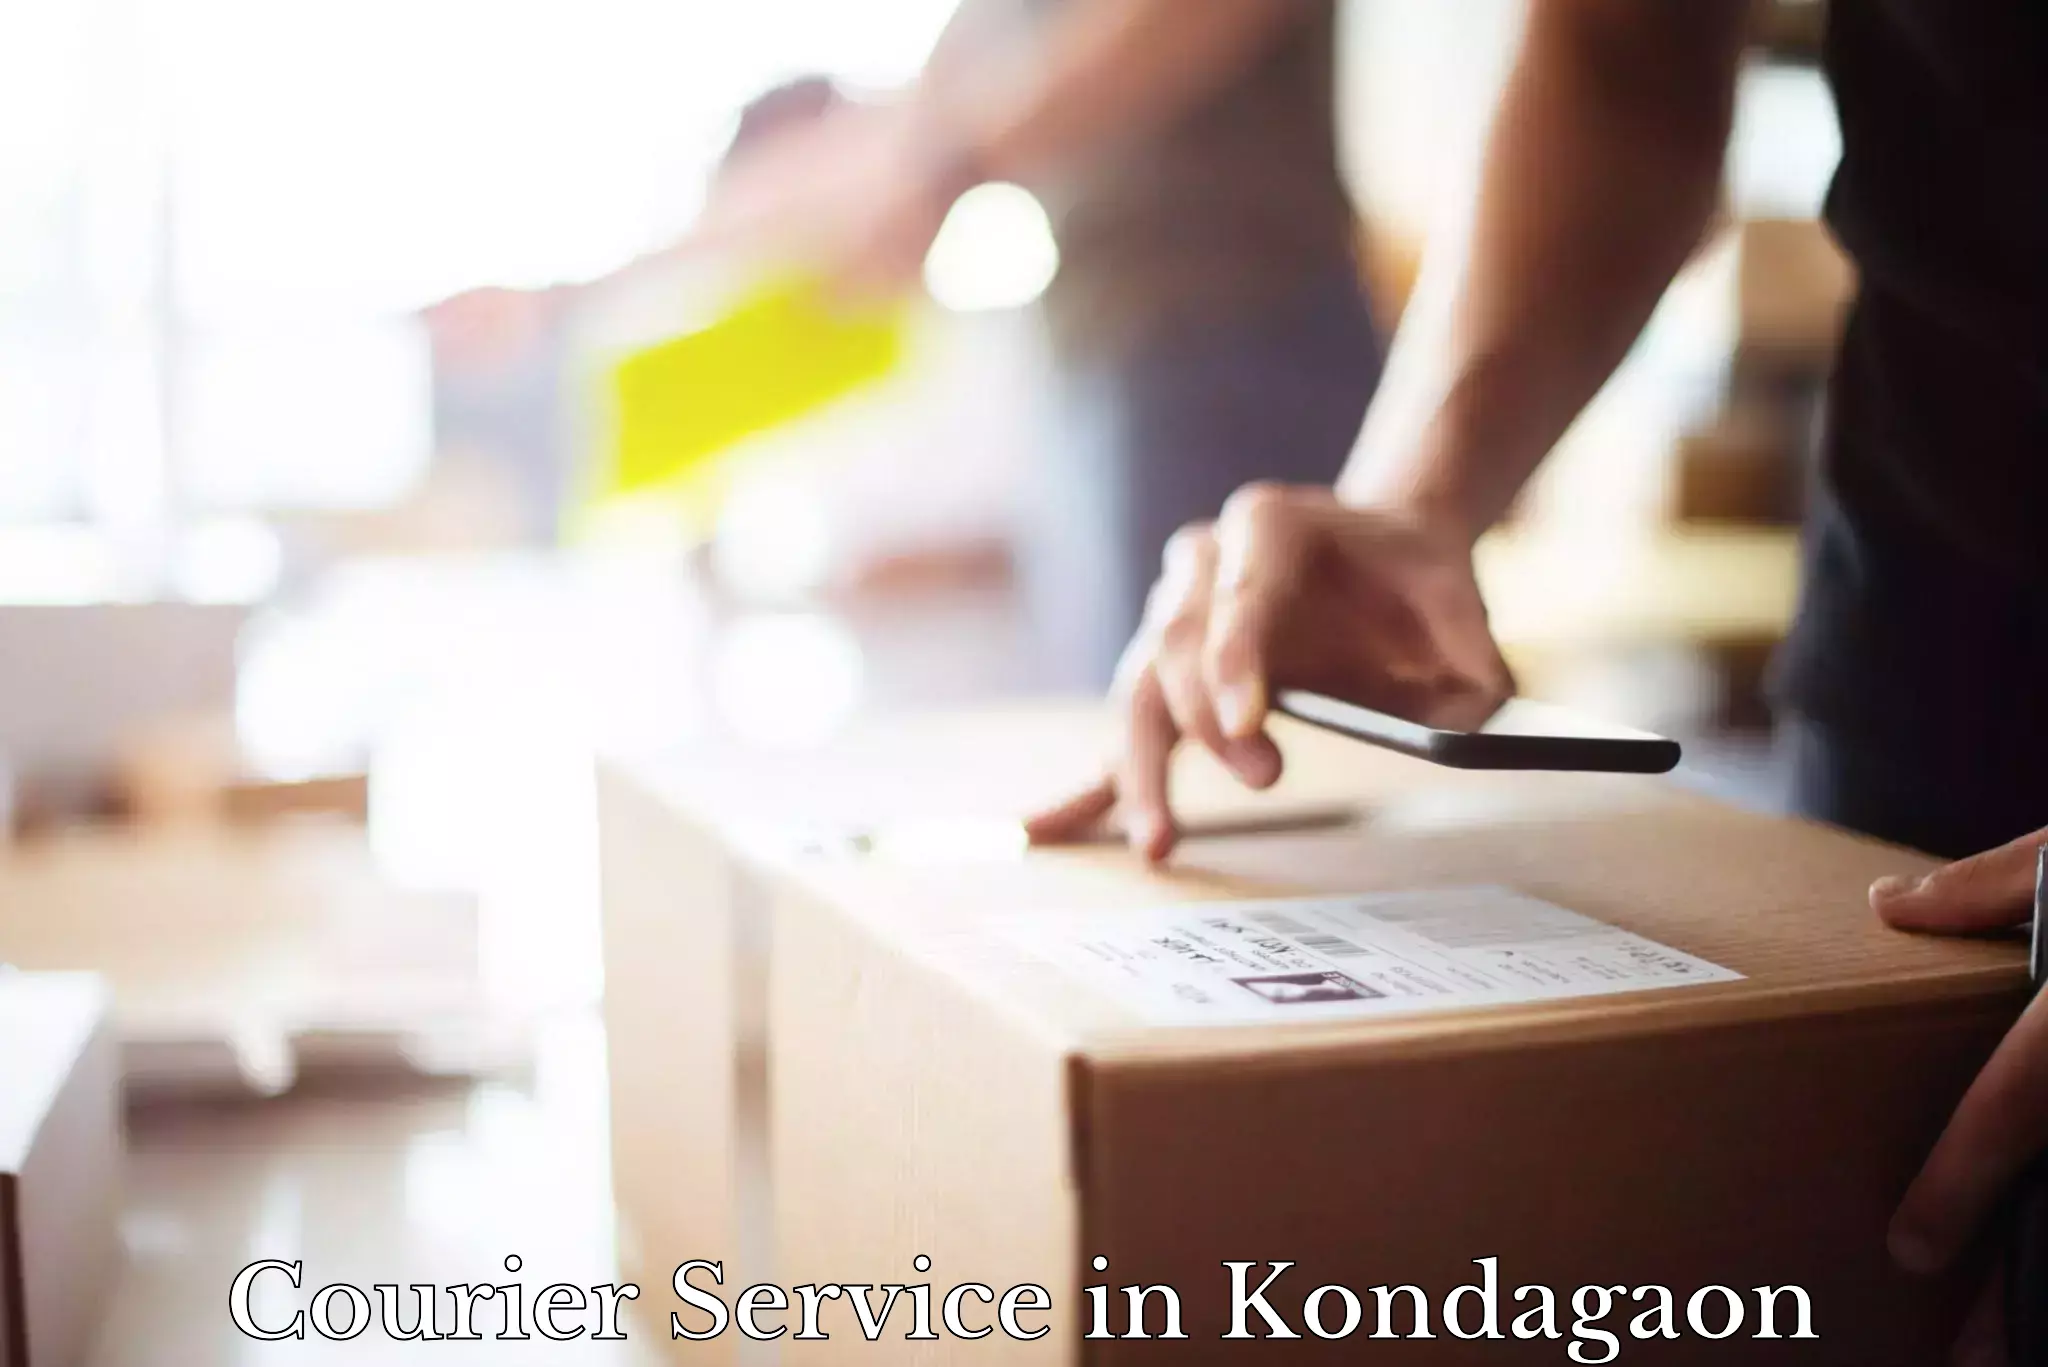 User-friendly delivery service in Kondagaon